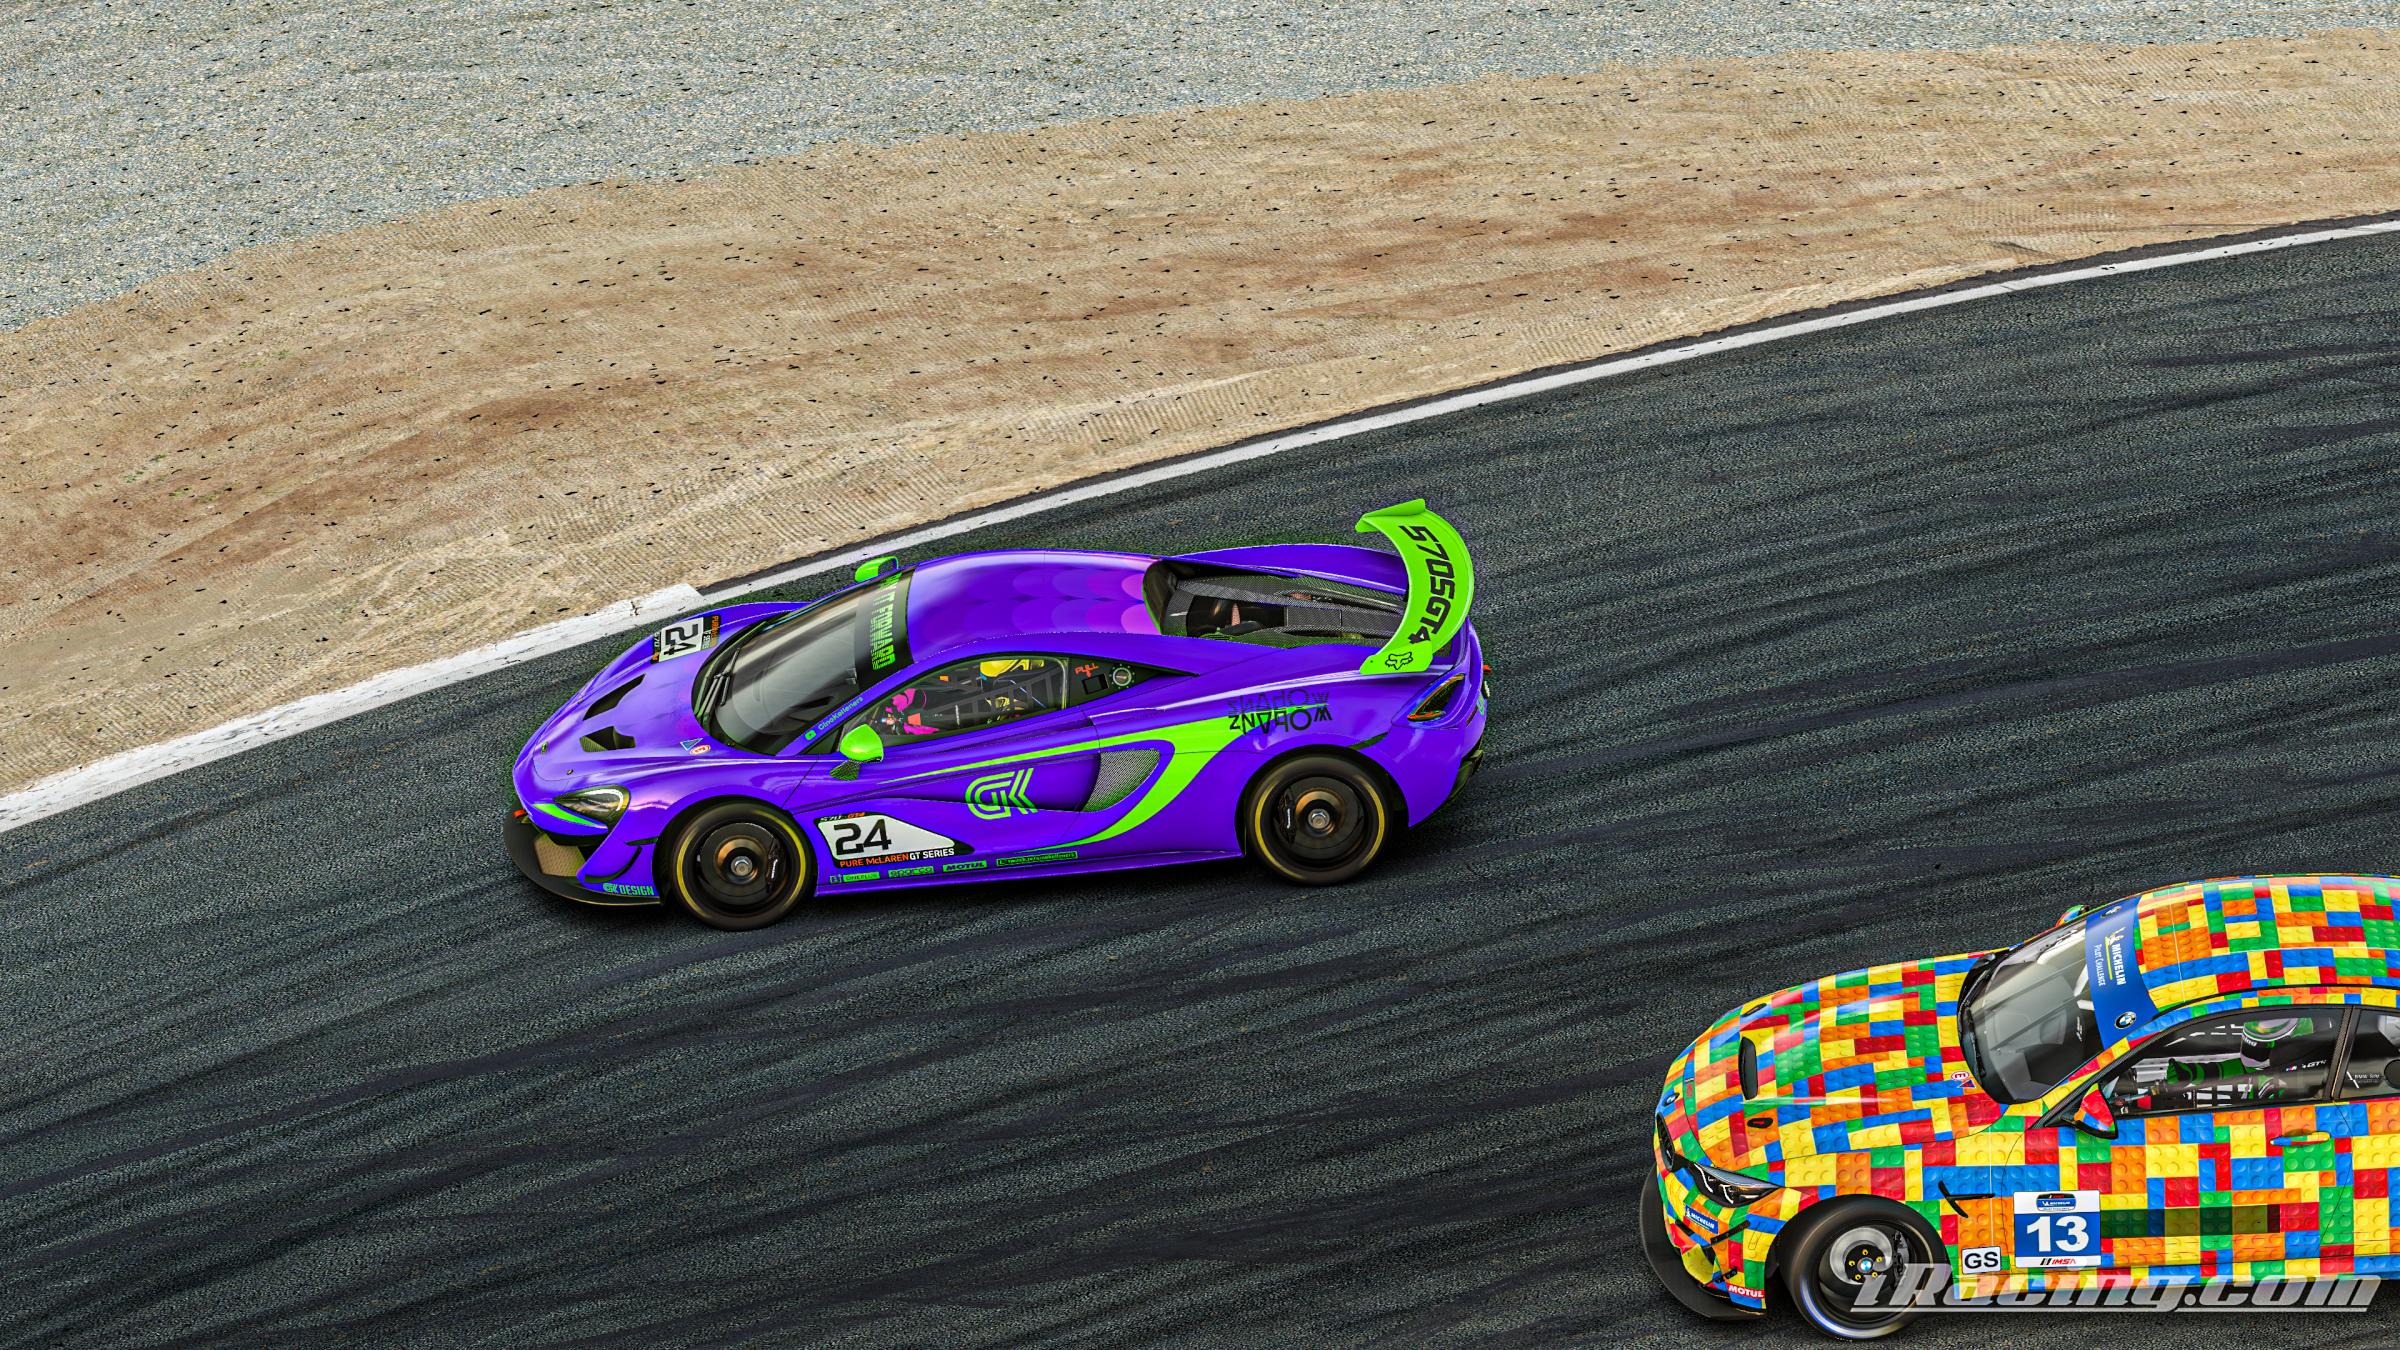 Preview of Ningaloo Reef Shark Livery - Mclaren 570S GT4 by Gino Kelleners